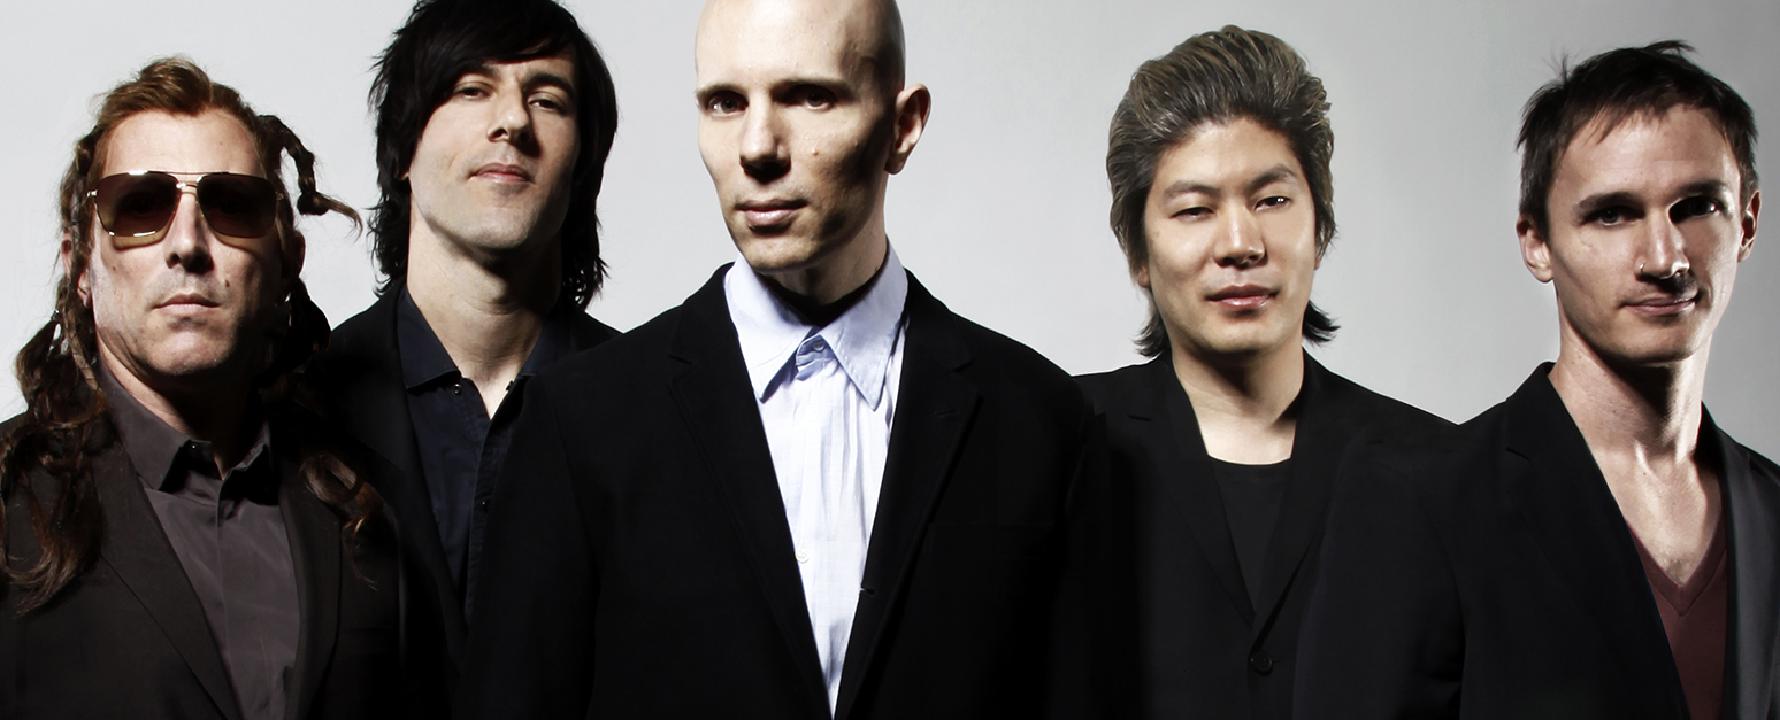 Promotional photograph of A Perfect Circle.